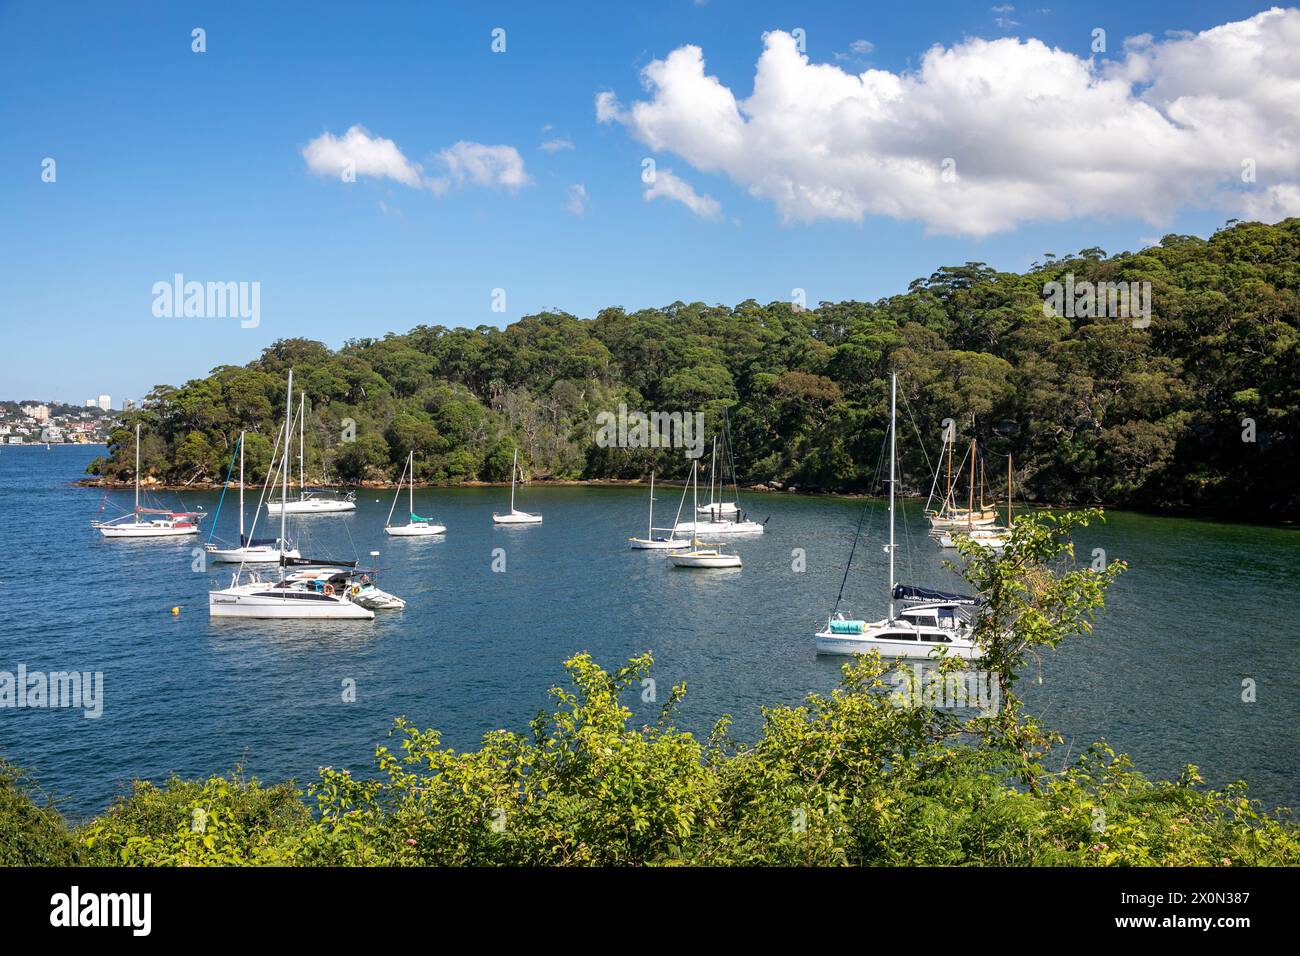 Taylors Bay on the lower north shore in Mosman Sydney, a secluded bay popular with yachties off the Bondi to Manly Scenic walk, Sydney,NSW,Australia Stock Photo